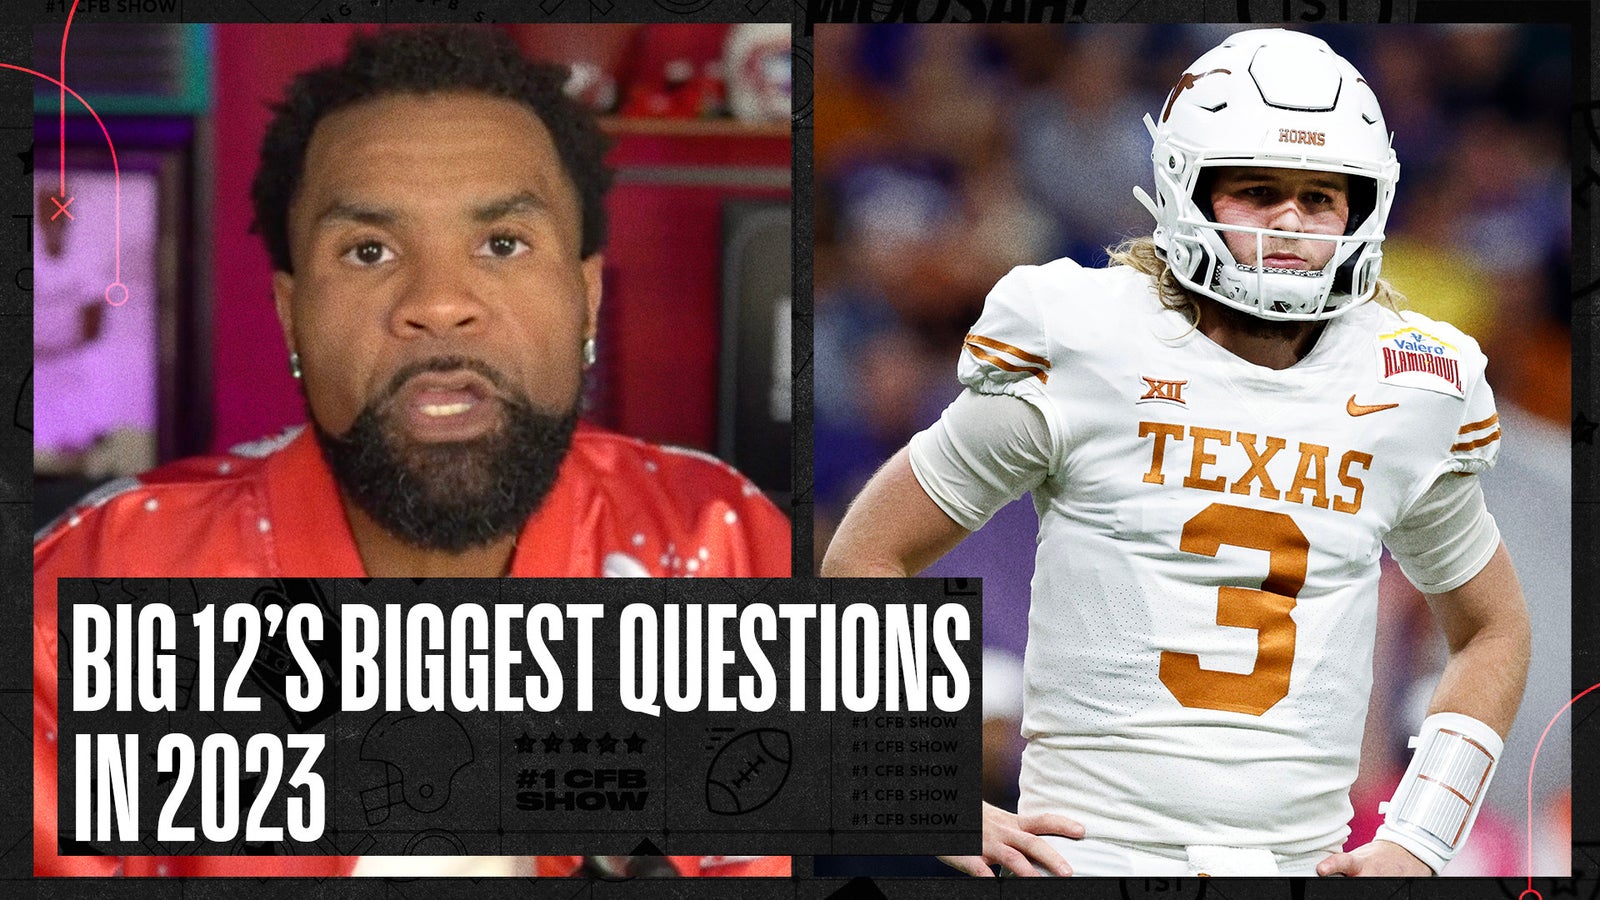 The biggest questions of the Big 12 in 2023